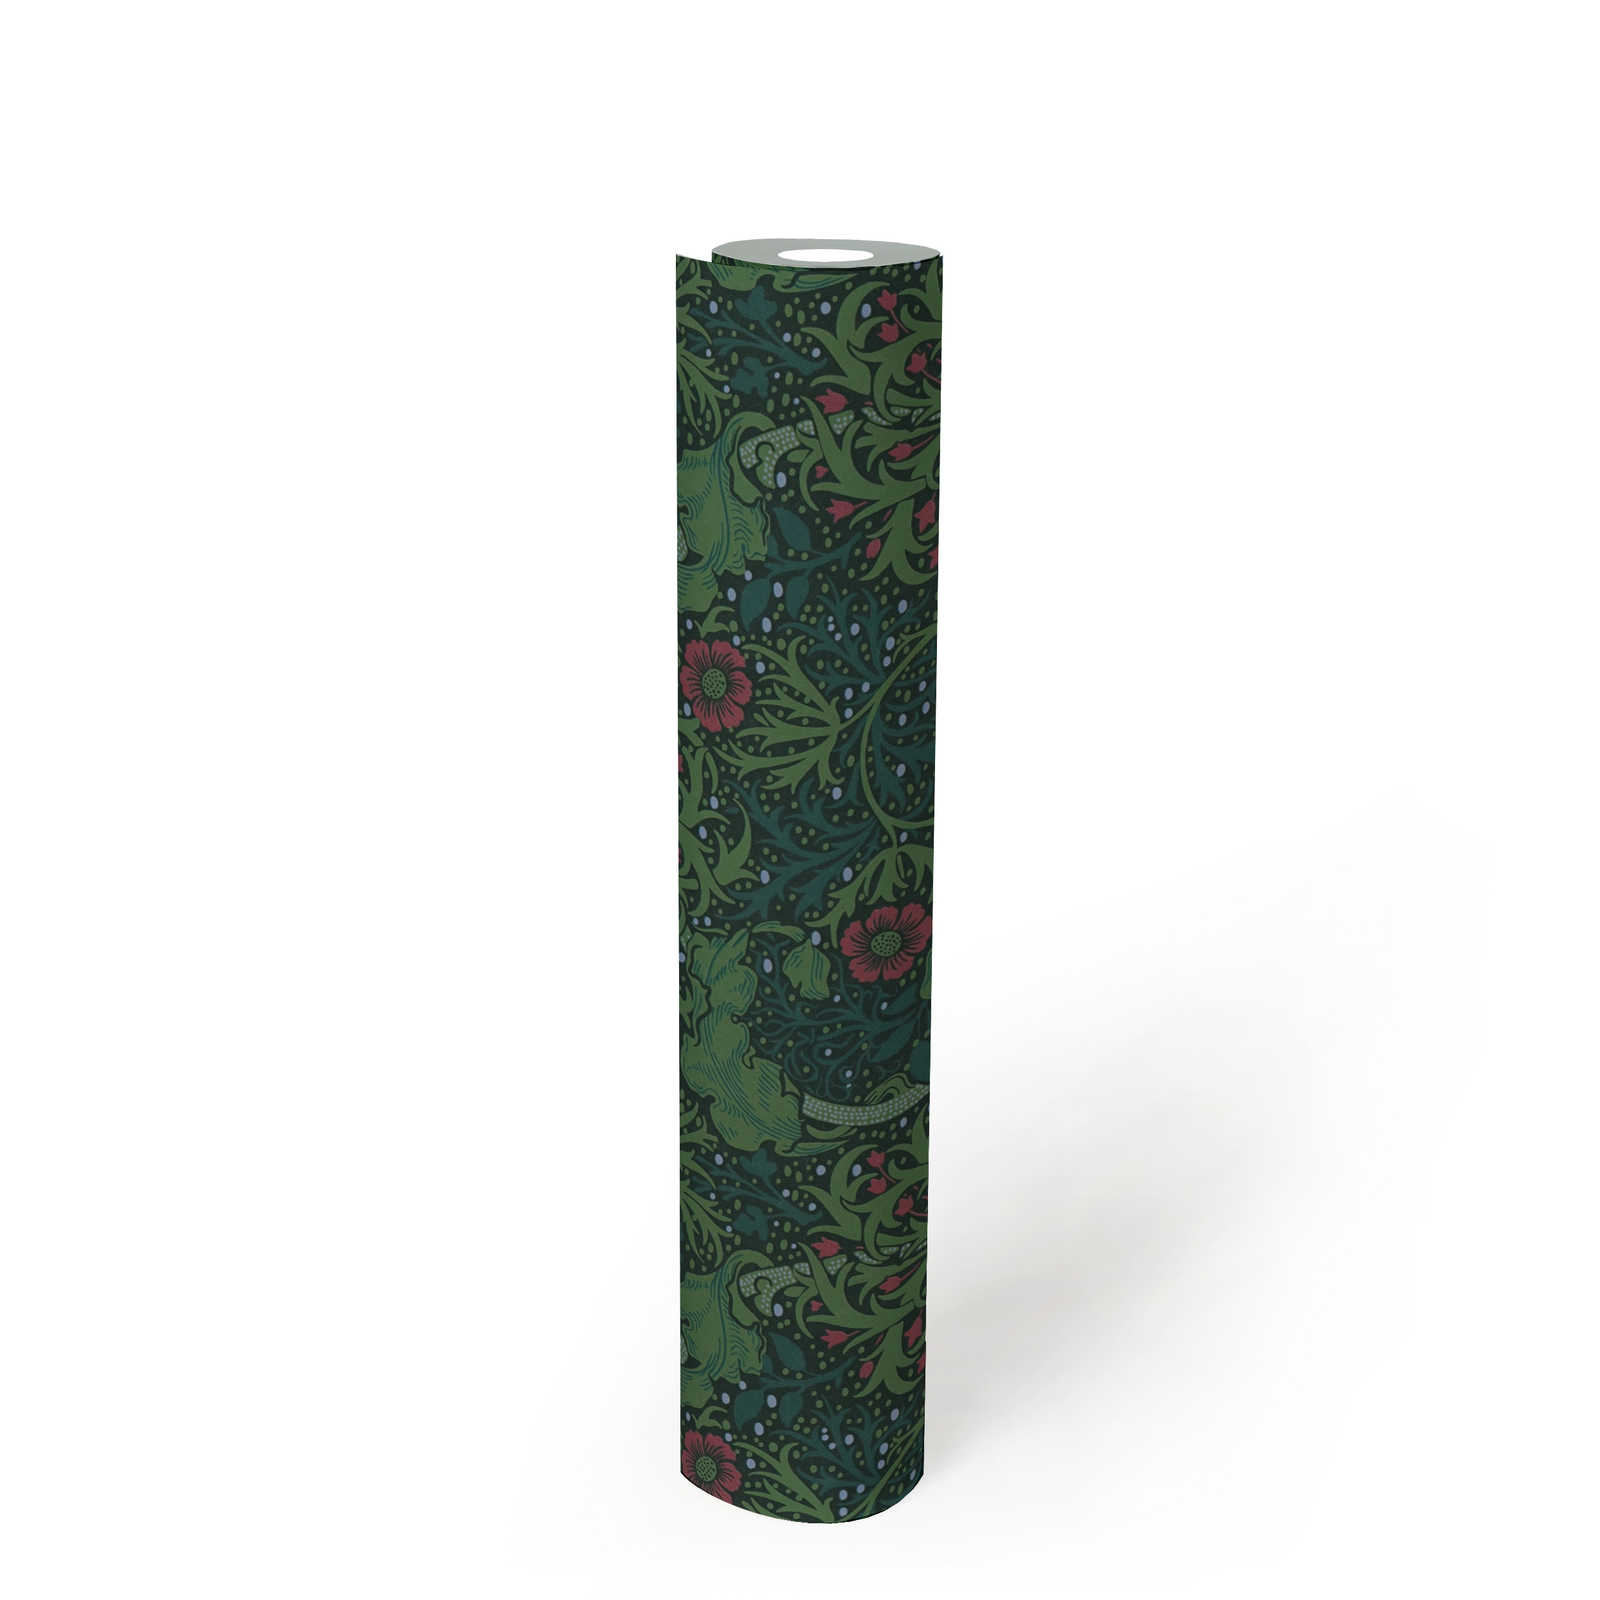             Floral wallpaper with blossoms and flower tendrils - green, pink, black
        